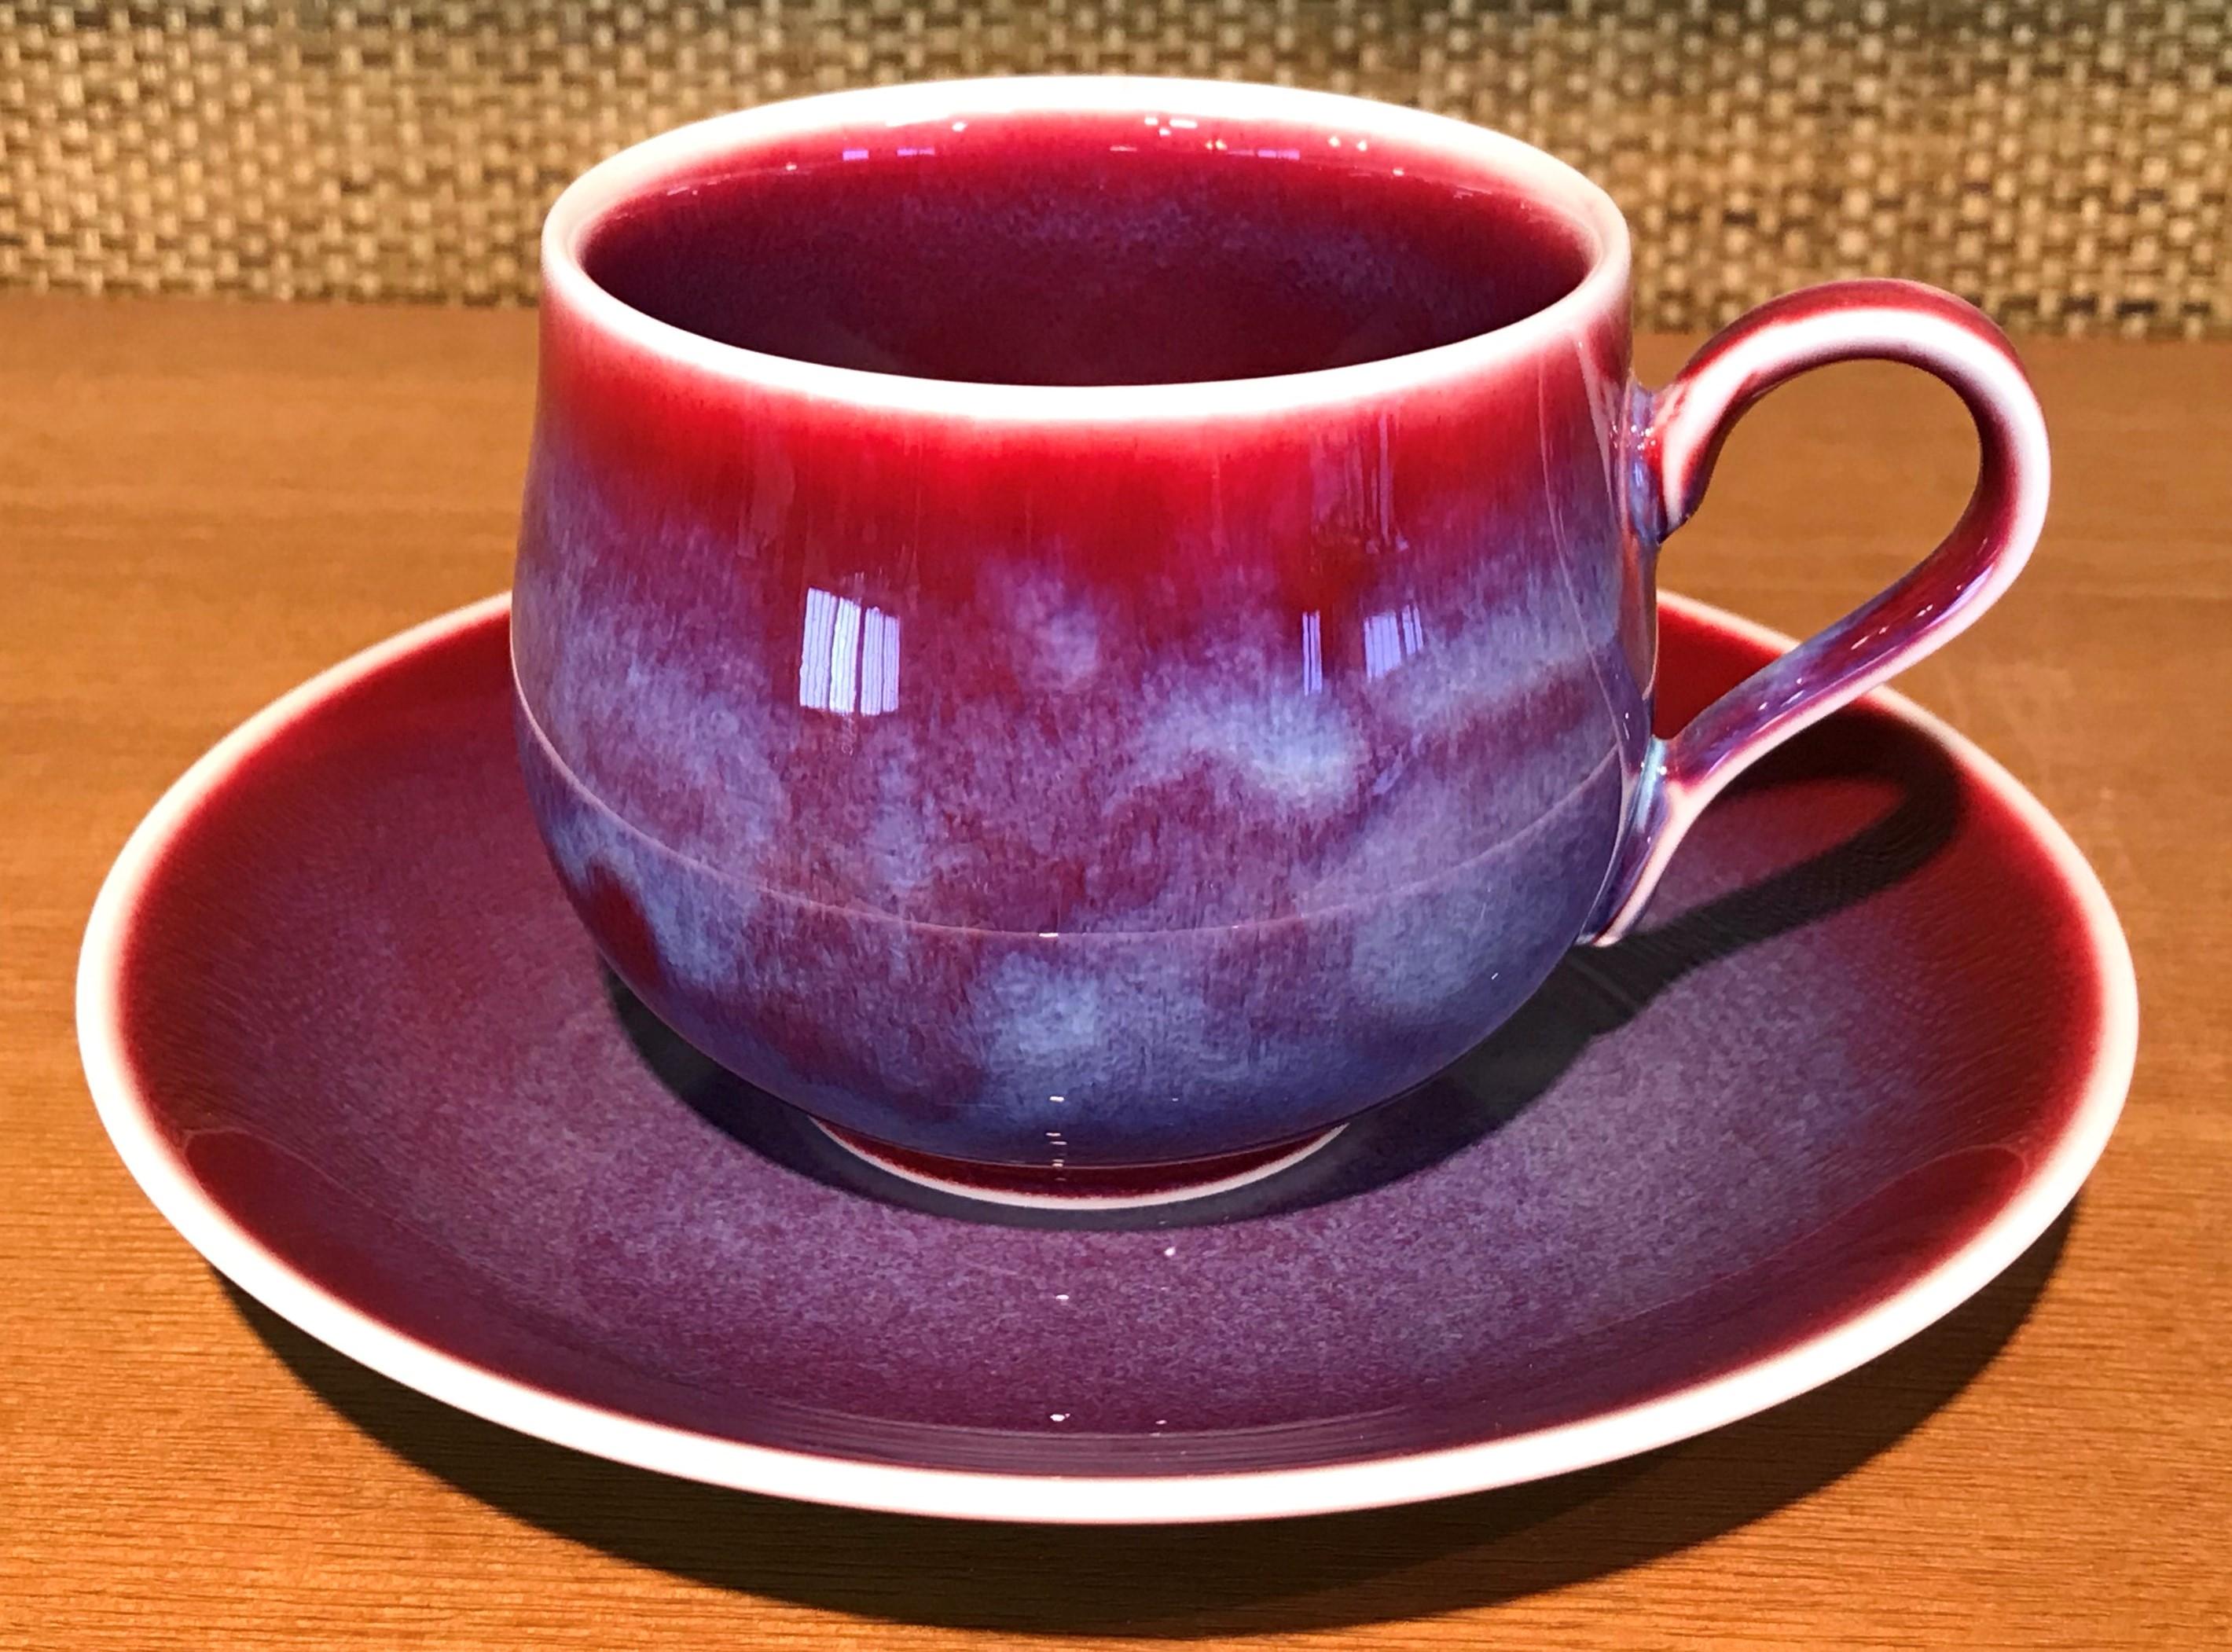 Japanese Turquoise Hand-Glazed Porcelain Cup and Saucer by Master Artist 7